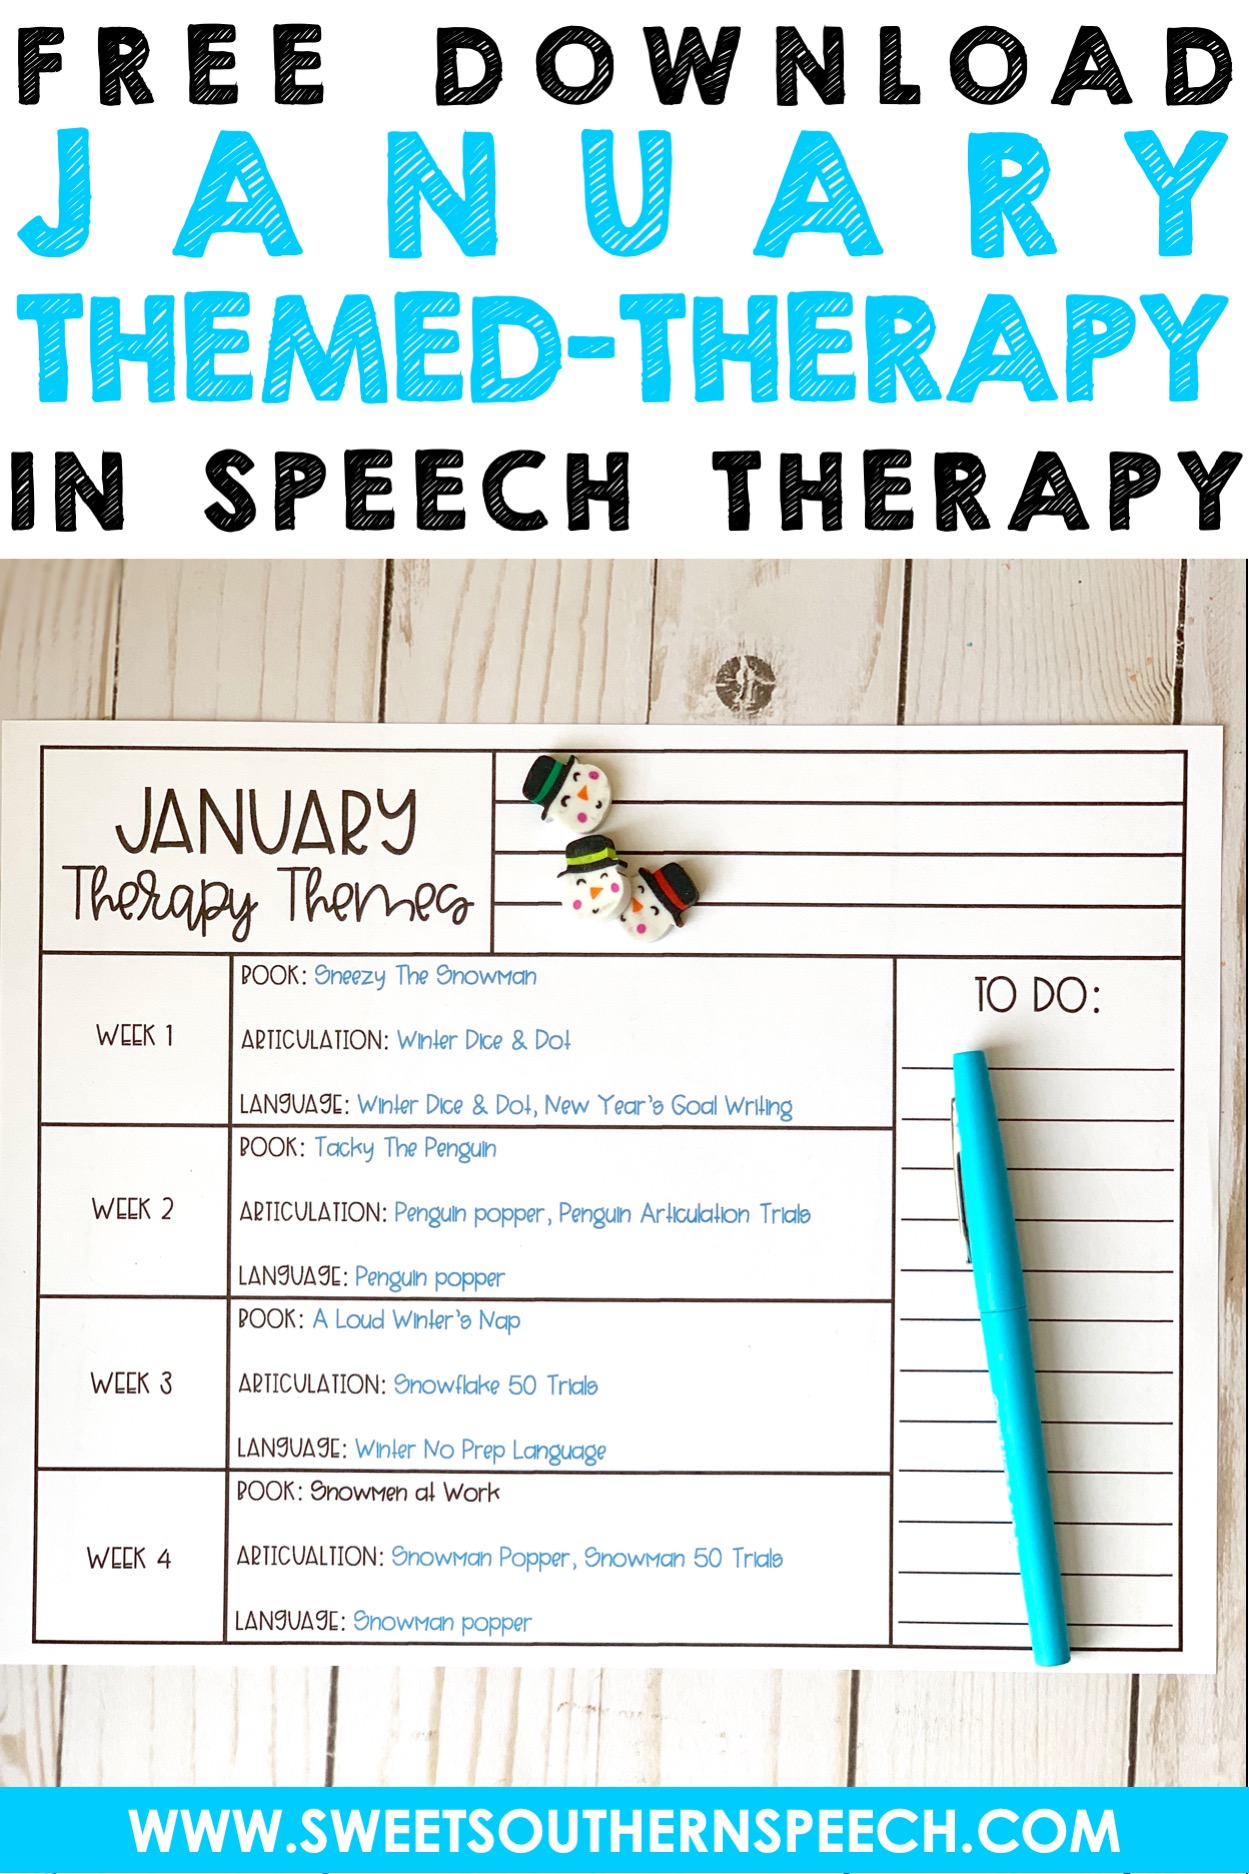 Download this free planning calendar for January themes to incorporate into your speech therapy sessions!